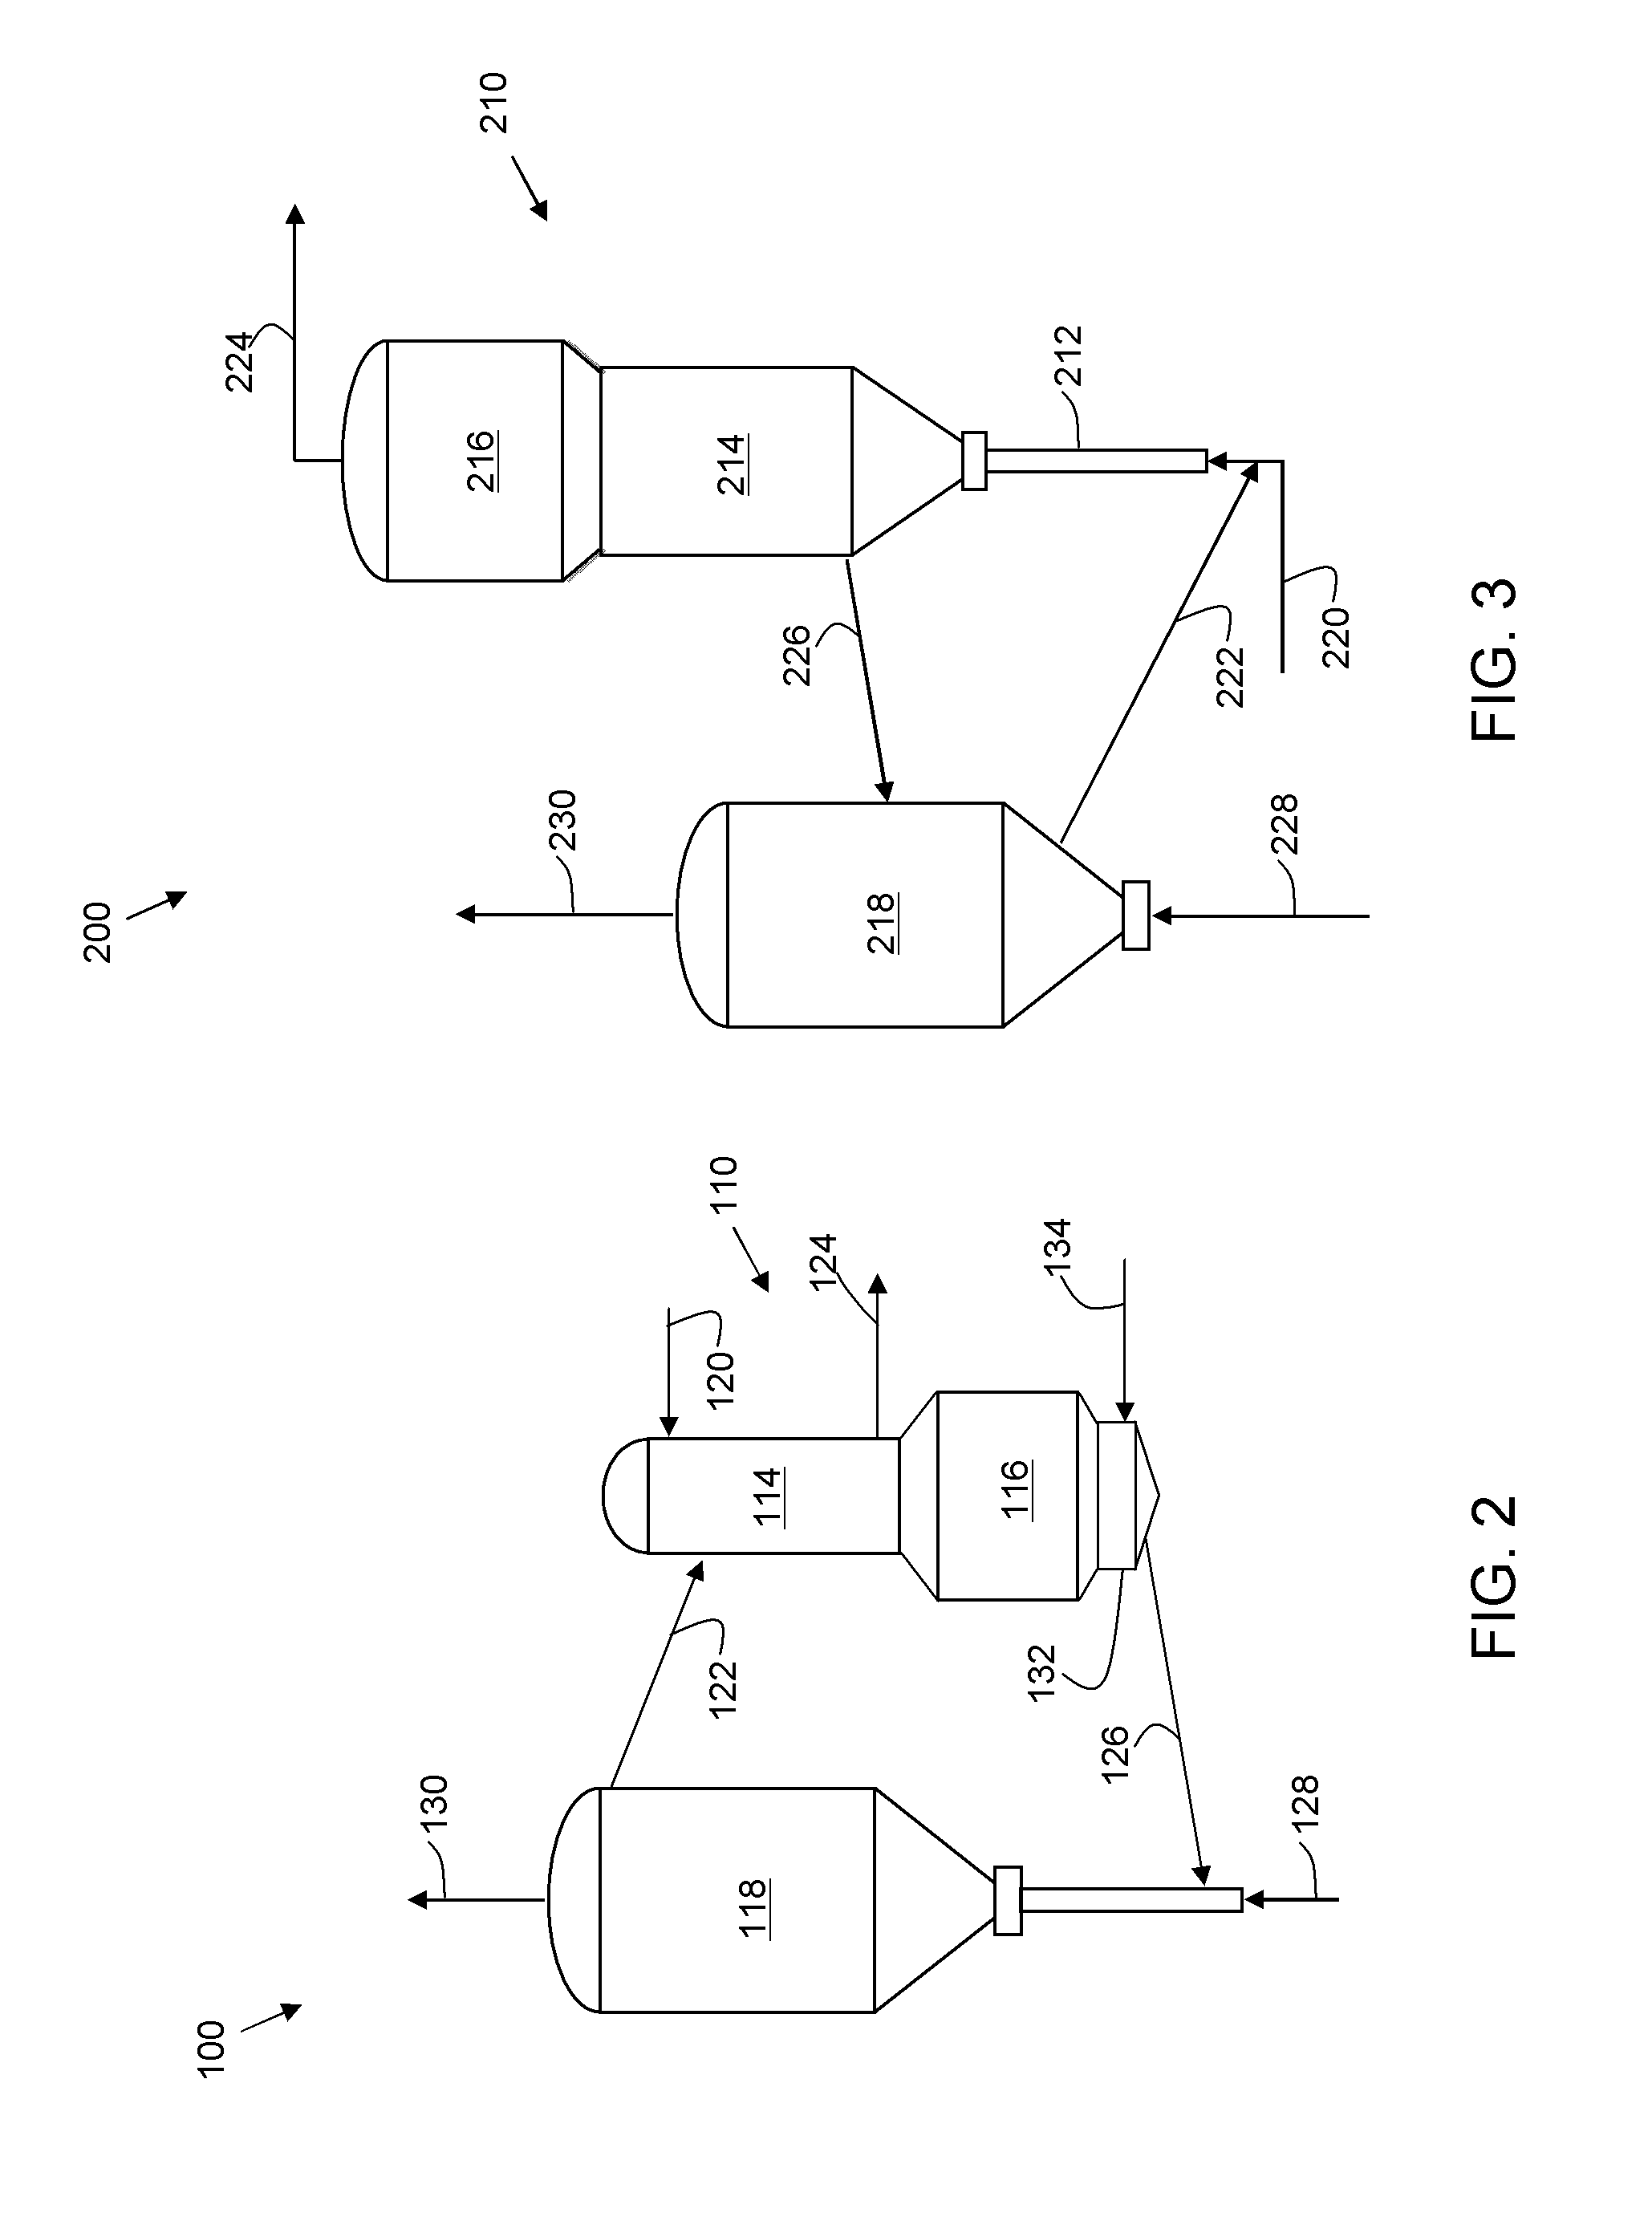 Cracking system and process integrating hydrocracking and fluidized catalytic cracking